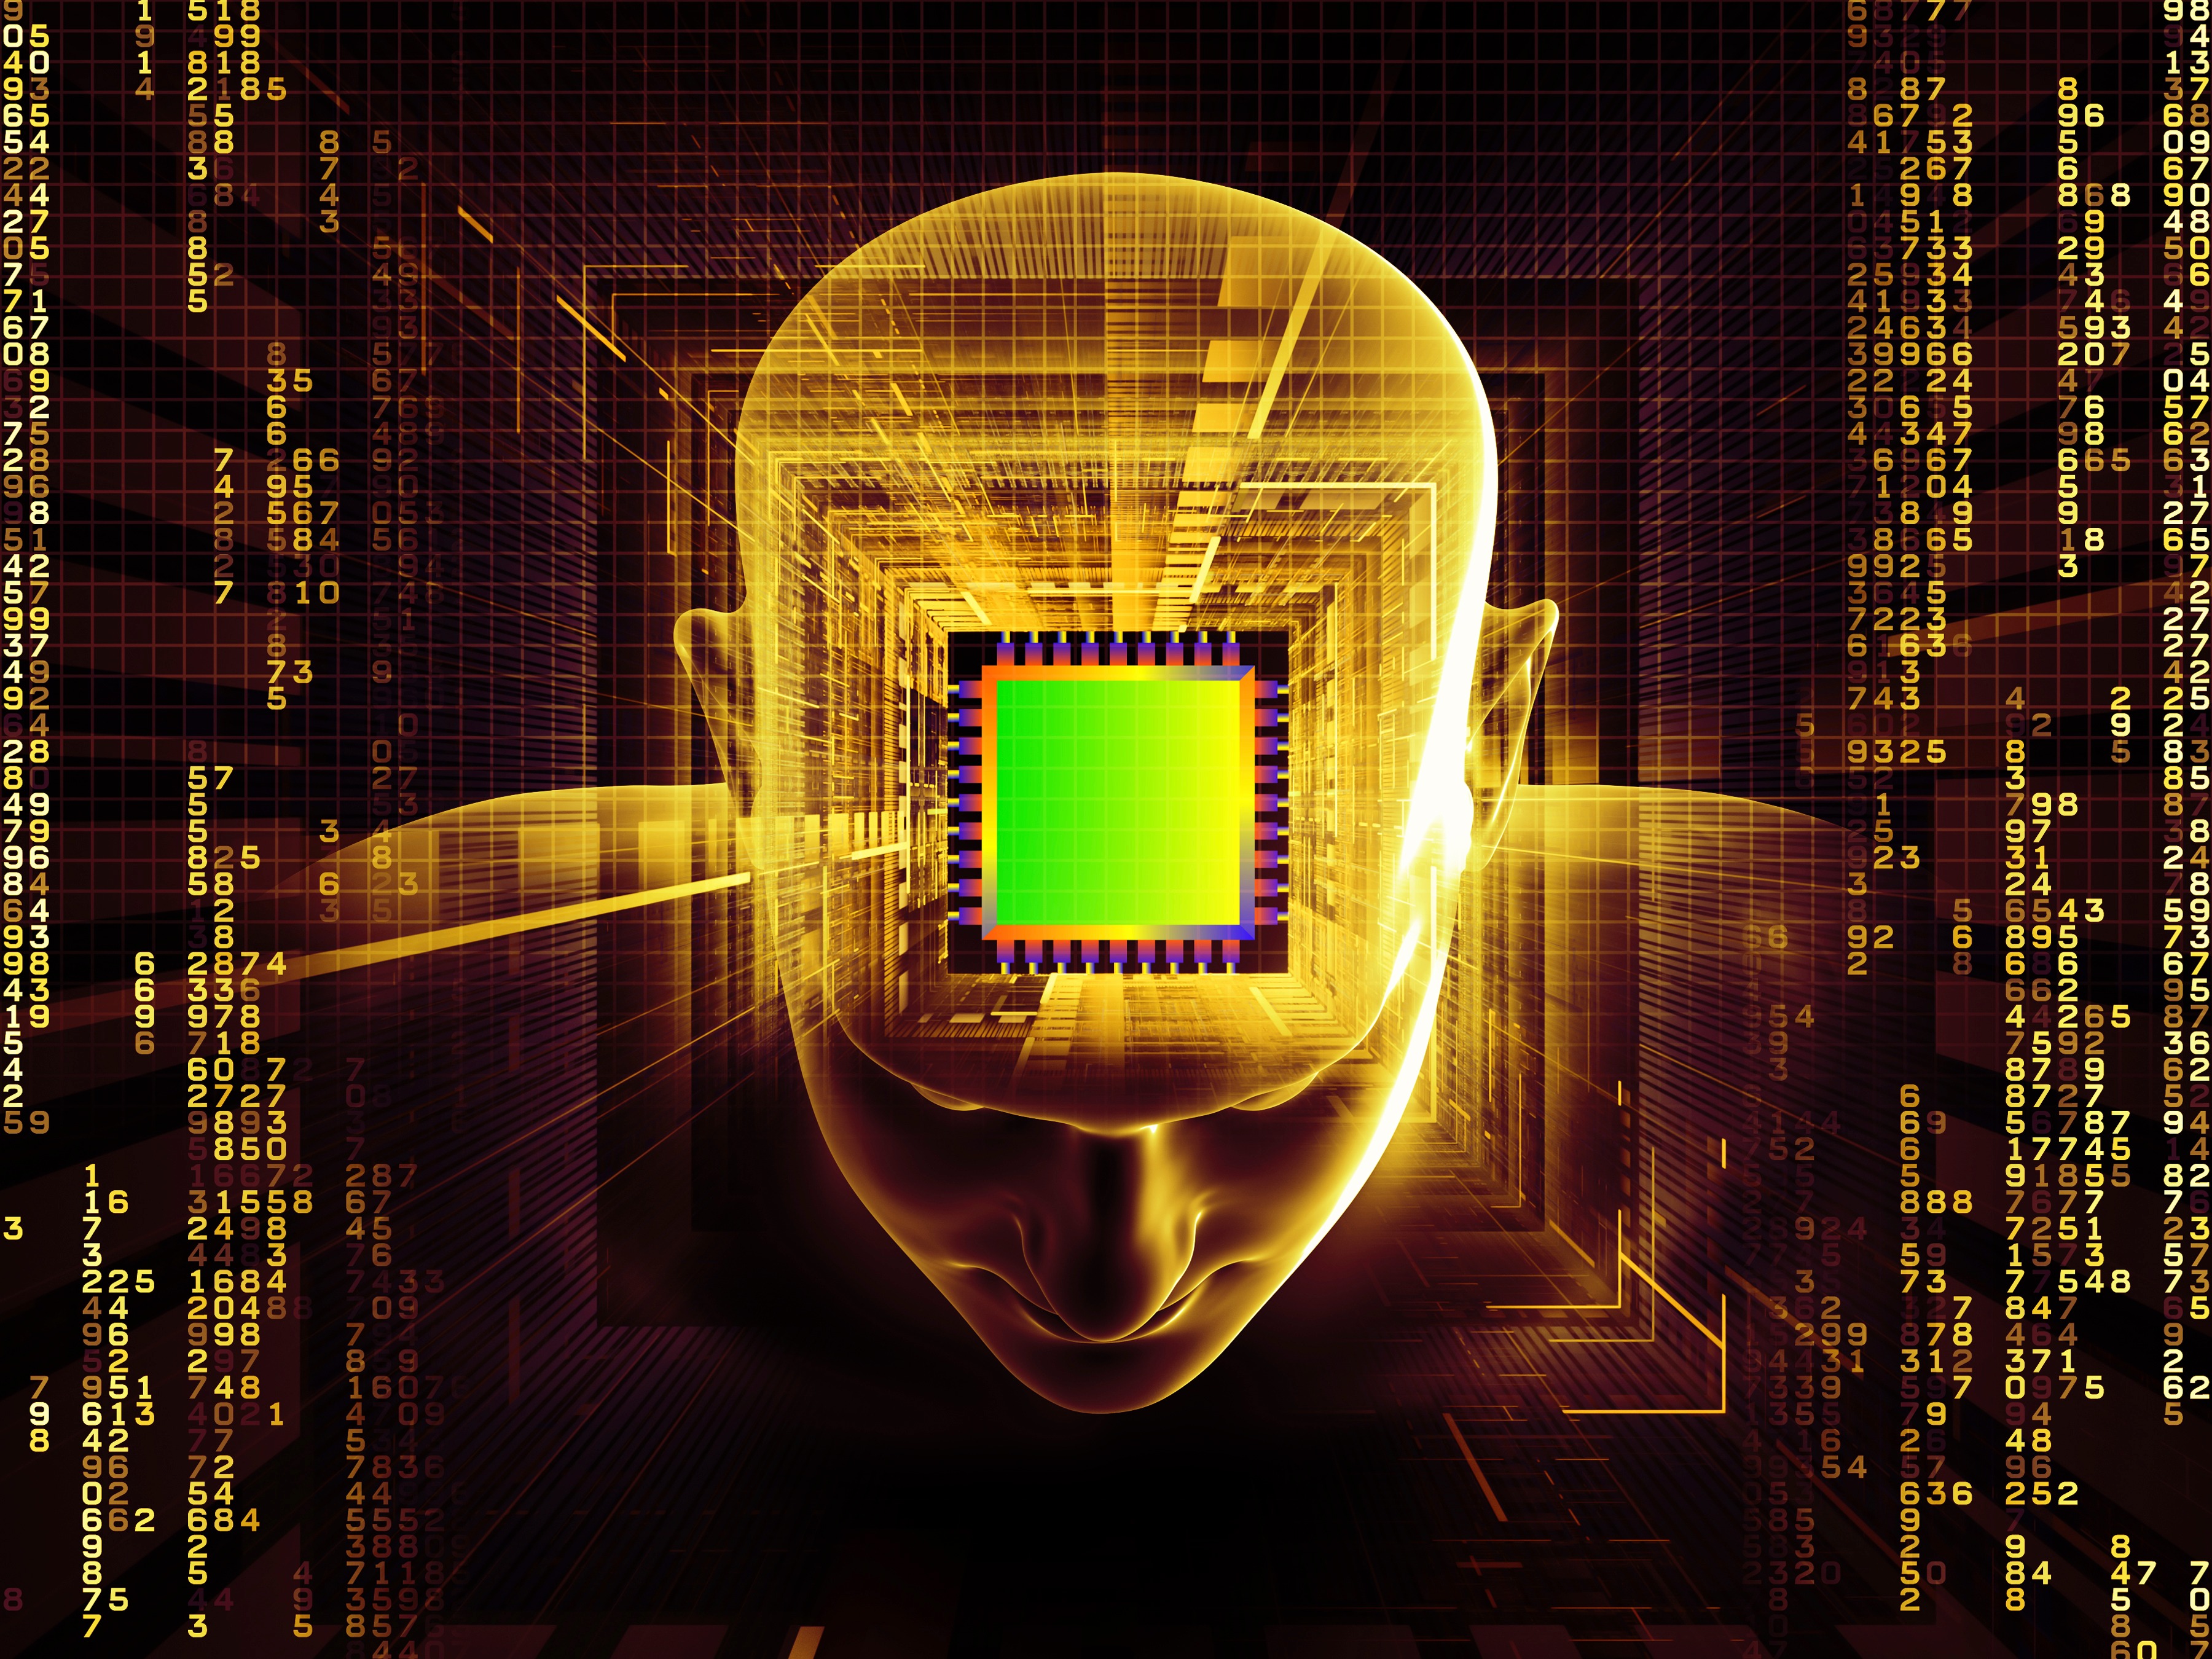 General 3600x2700 artwork microchip technology numbers head x-rays square hologram